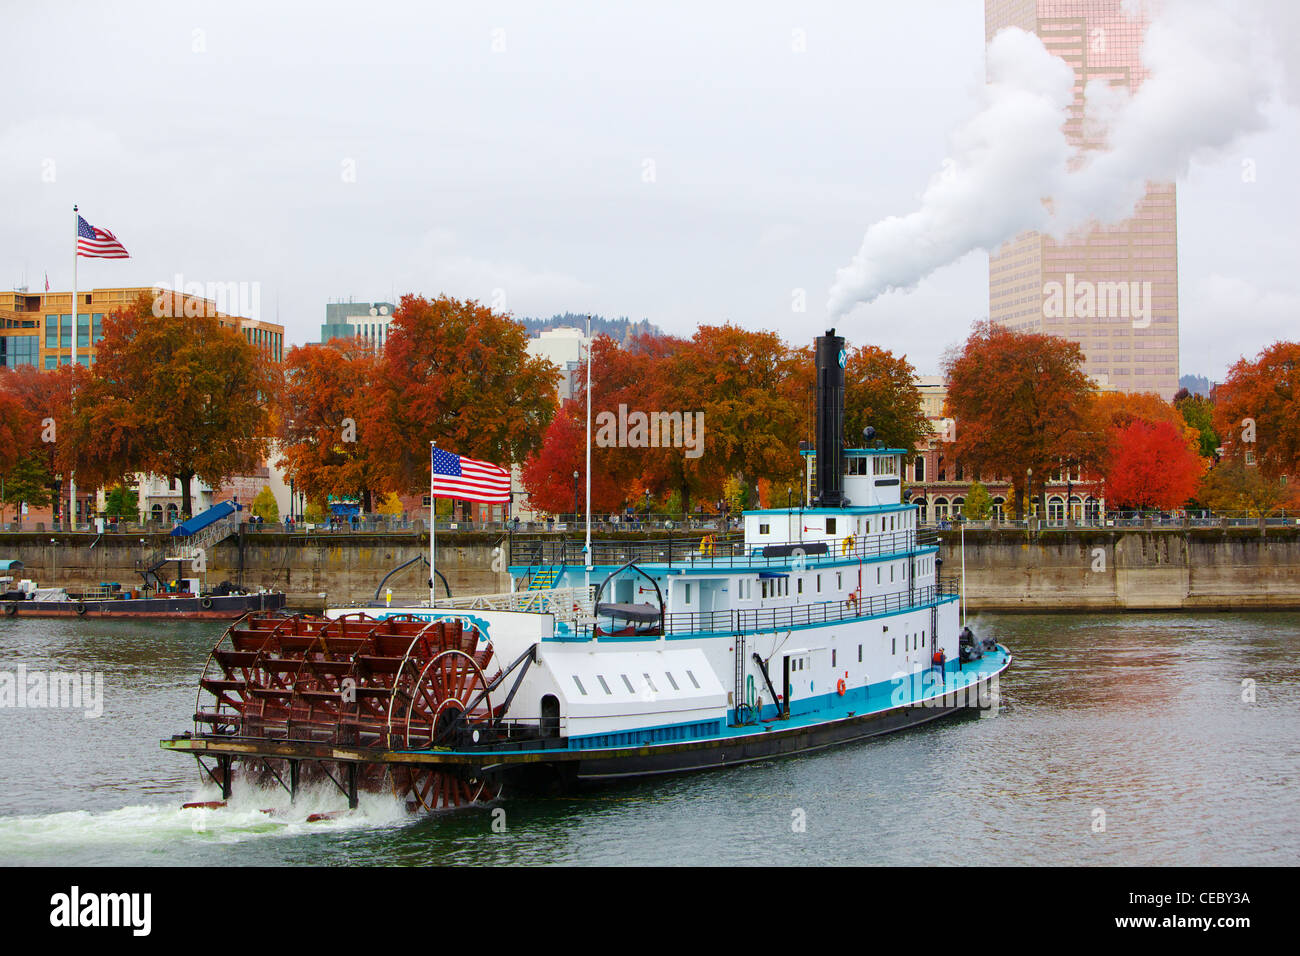 Ferry or steam boat in Portland on Williamette river under steam with two American flags on an overcast day Stock Photo